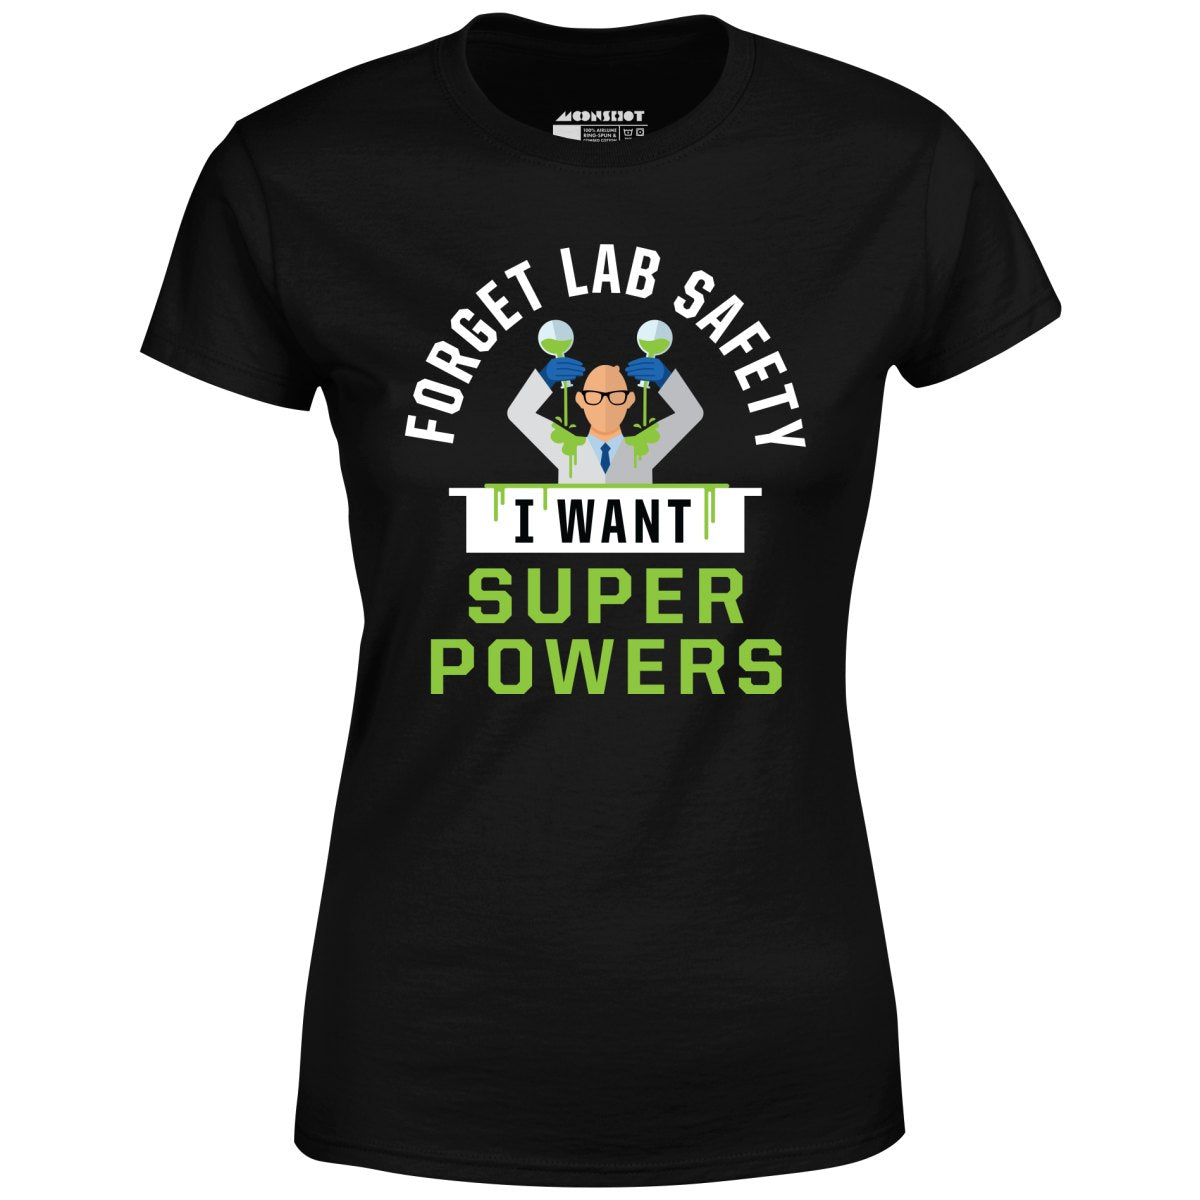 Forget Lab Safety I Want Super Powers - Women's T-Shirt